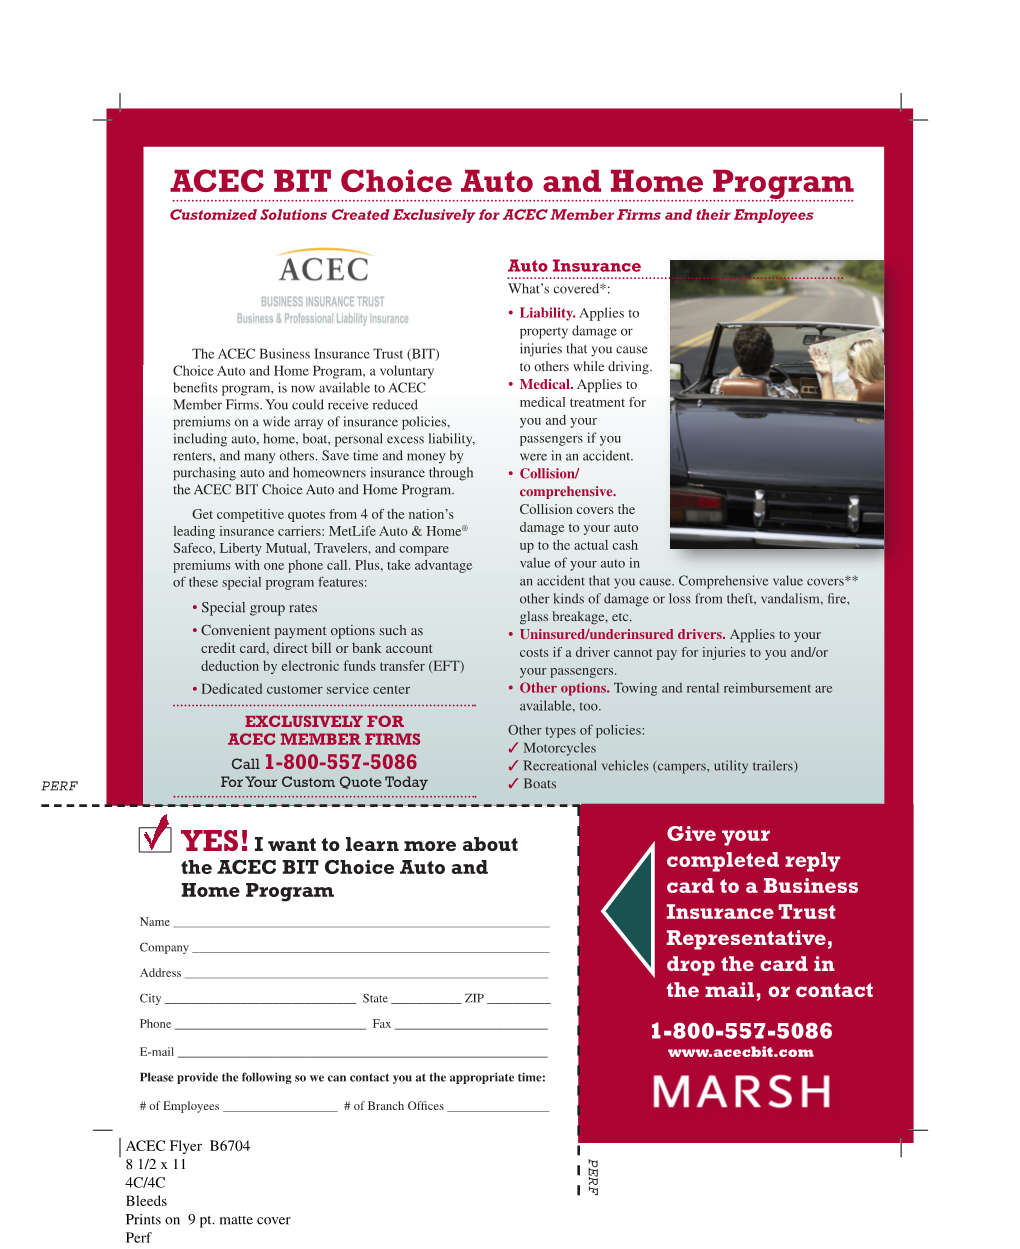 ACEC BIT Choice Auto and Home Program Customized Solutions Created Exclusively for ACEC Member Firms and Their Employees